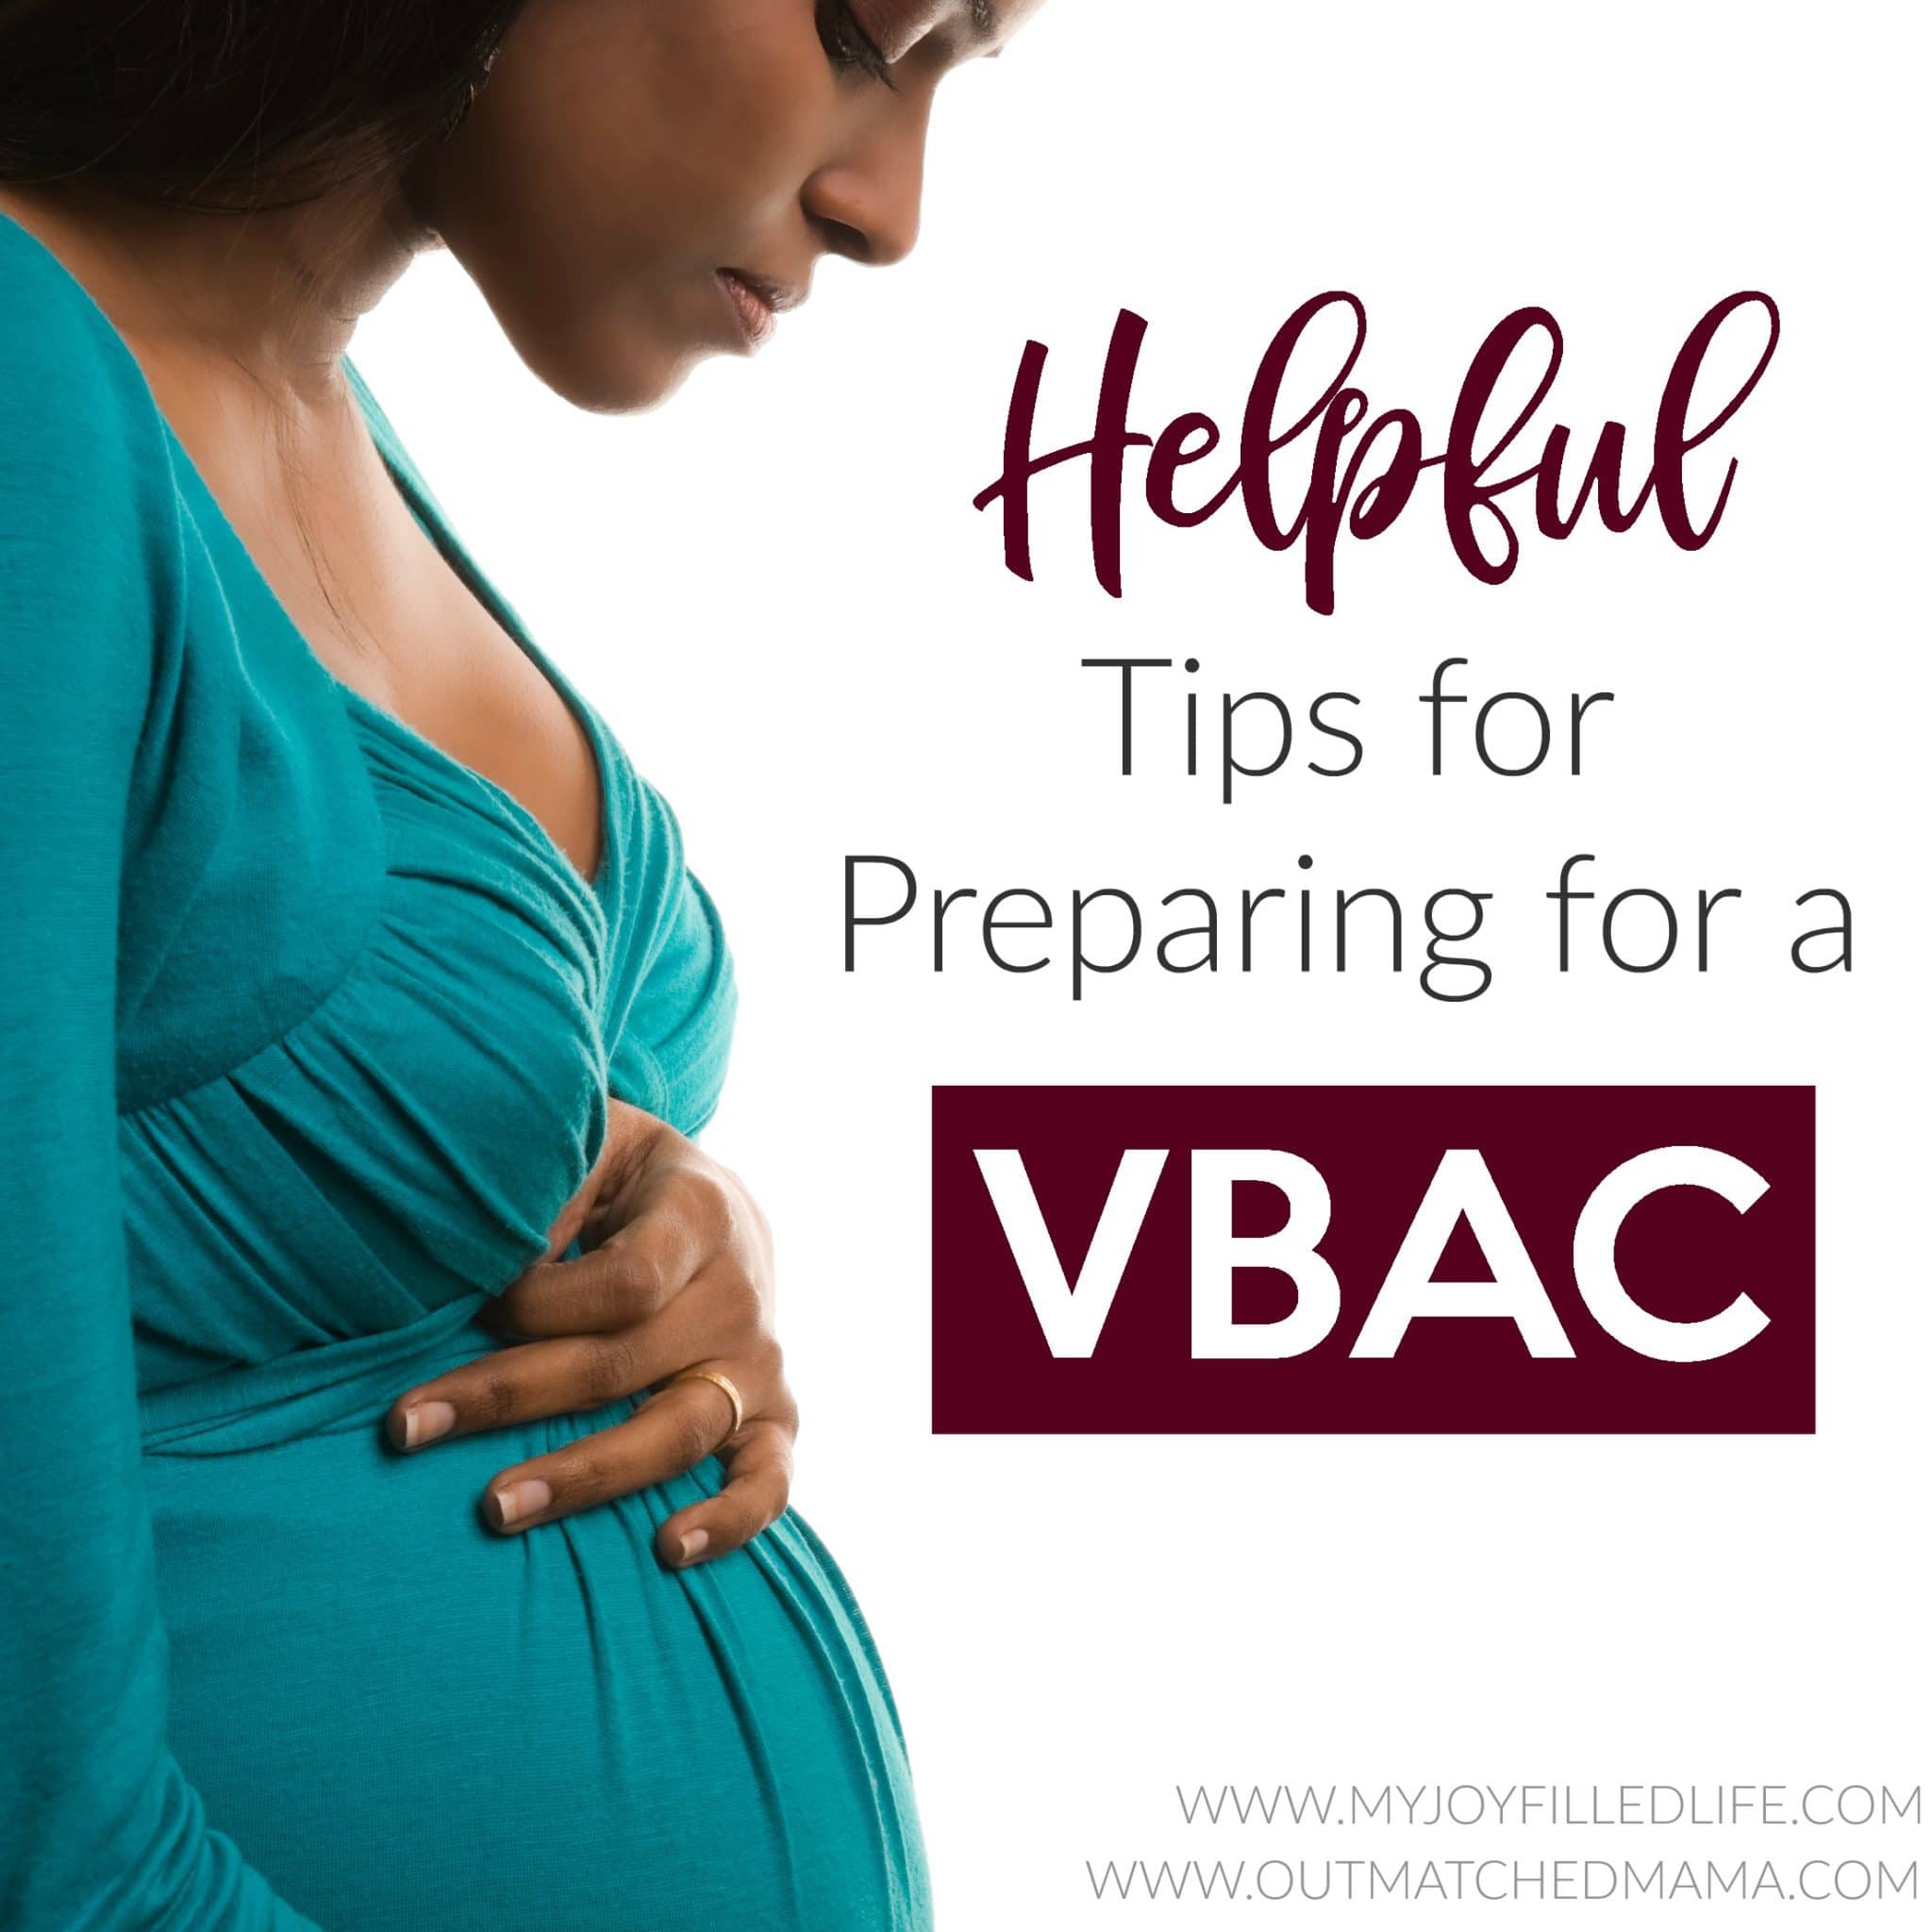 Helpful Tips for Preparing for a VBAC